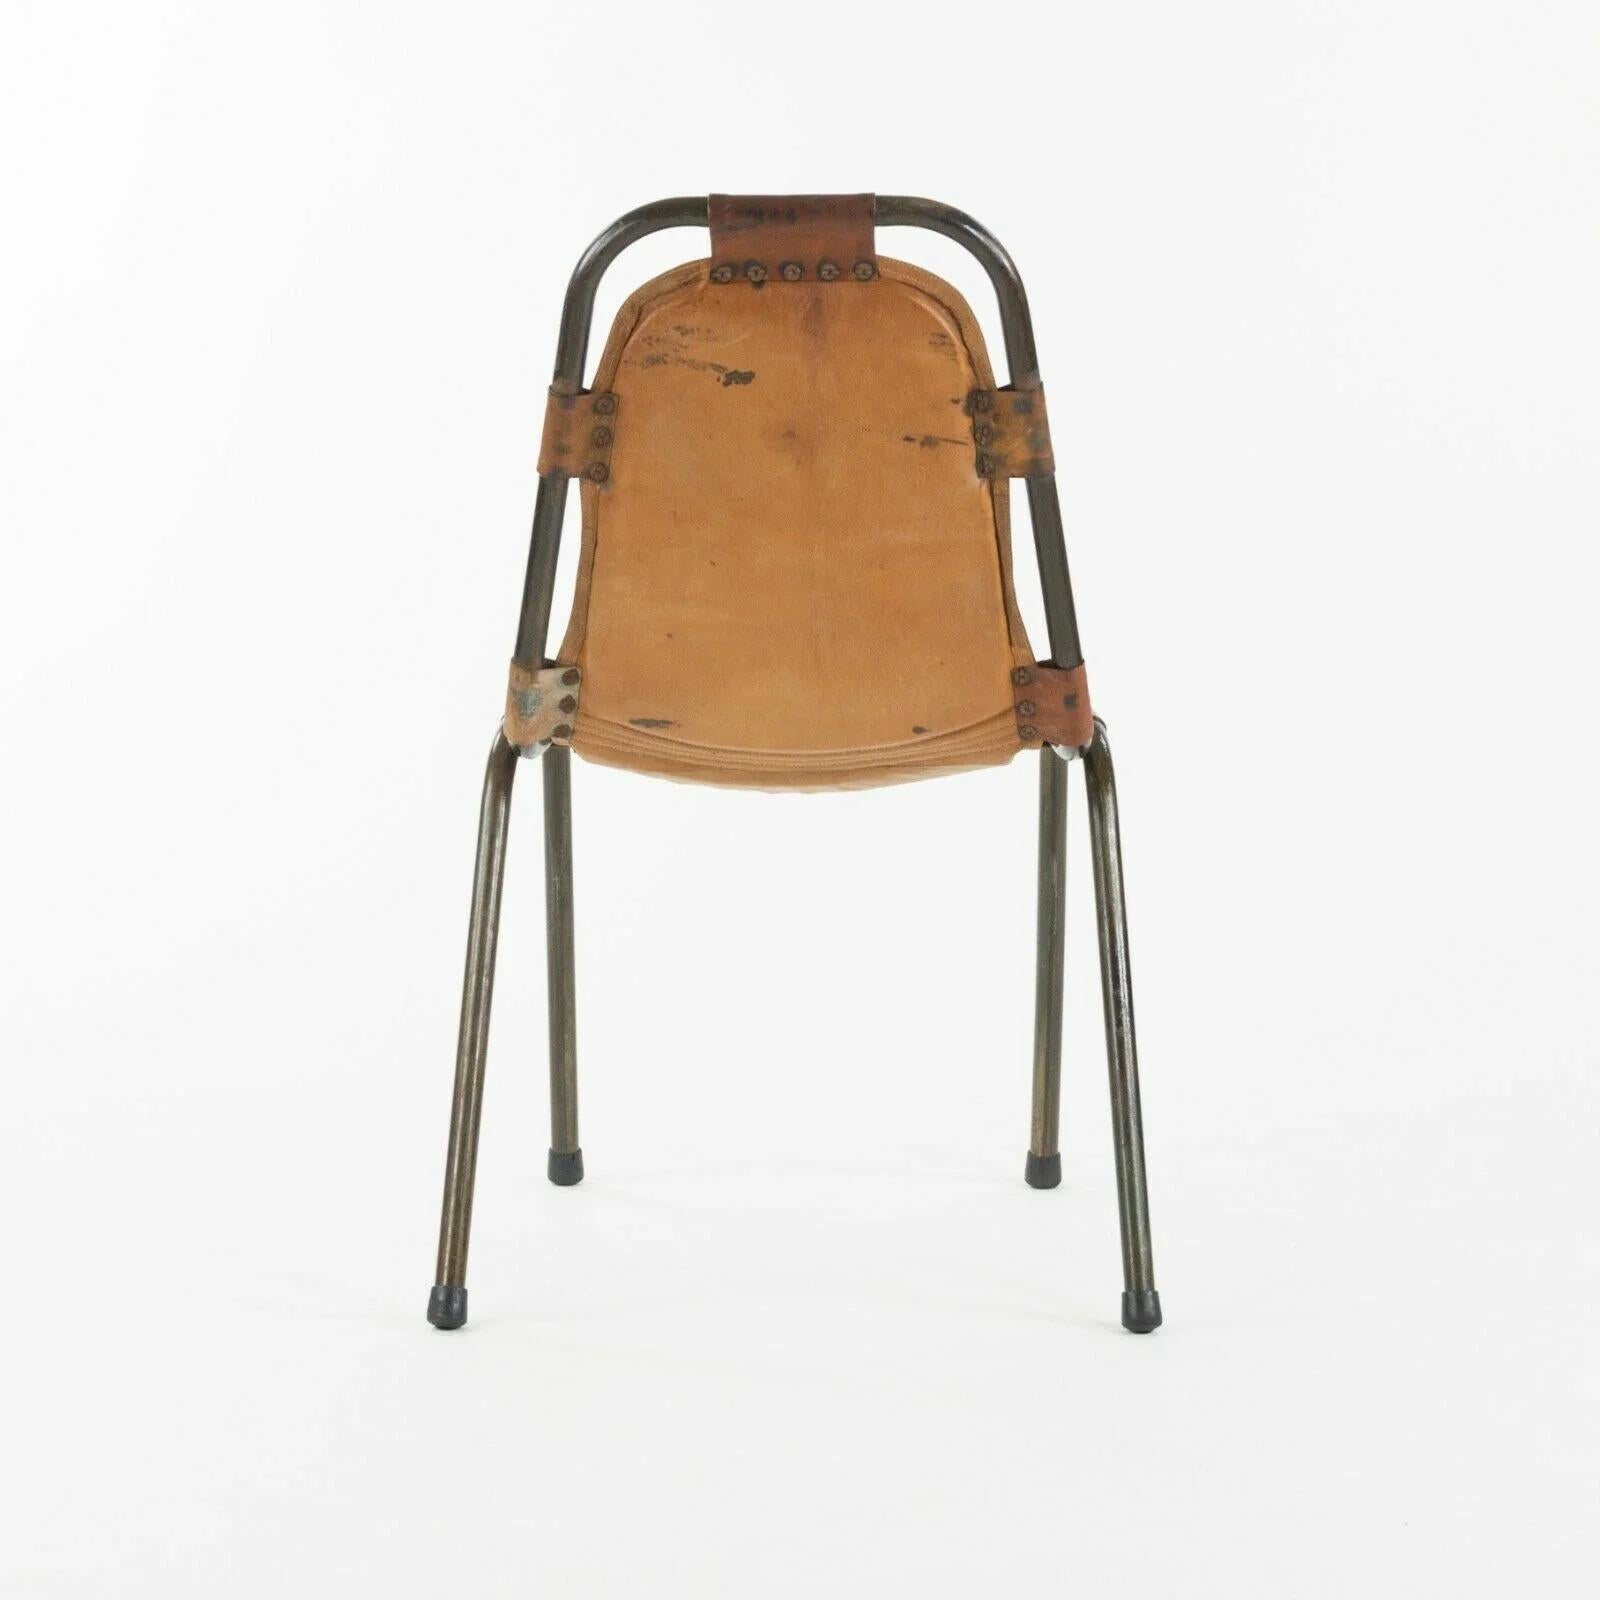 Mid-20th Century 1960s Dal Vera Stacking Chairs for Charlotte Perriand Les Arcs Resort Set of 6 For Sale